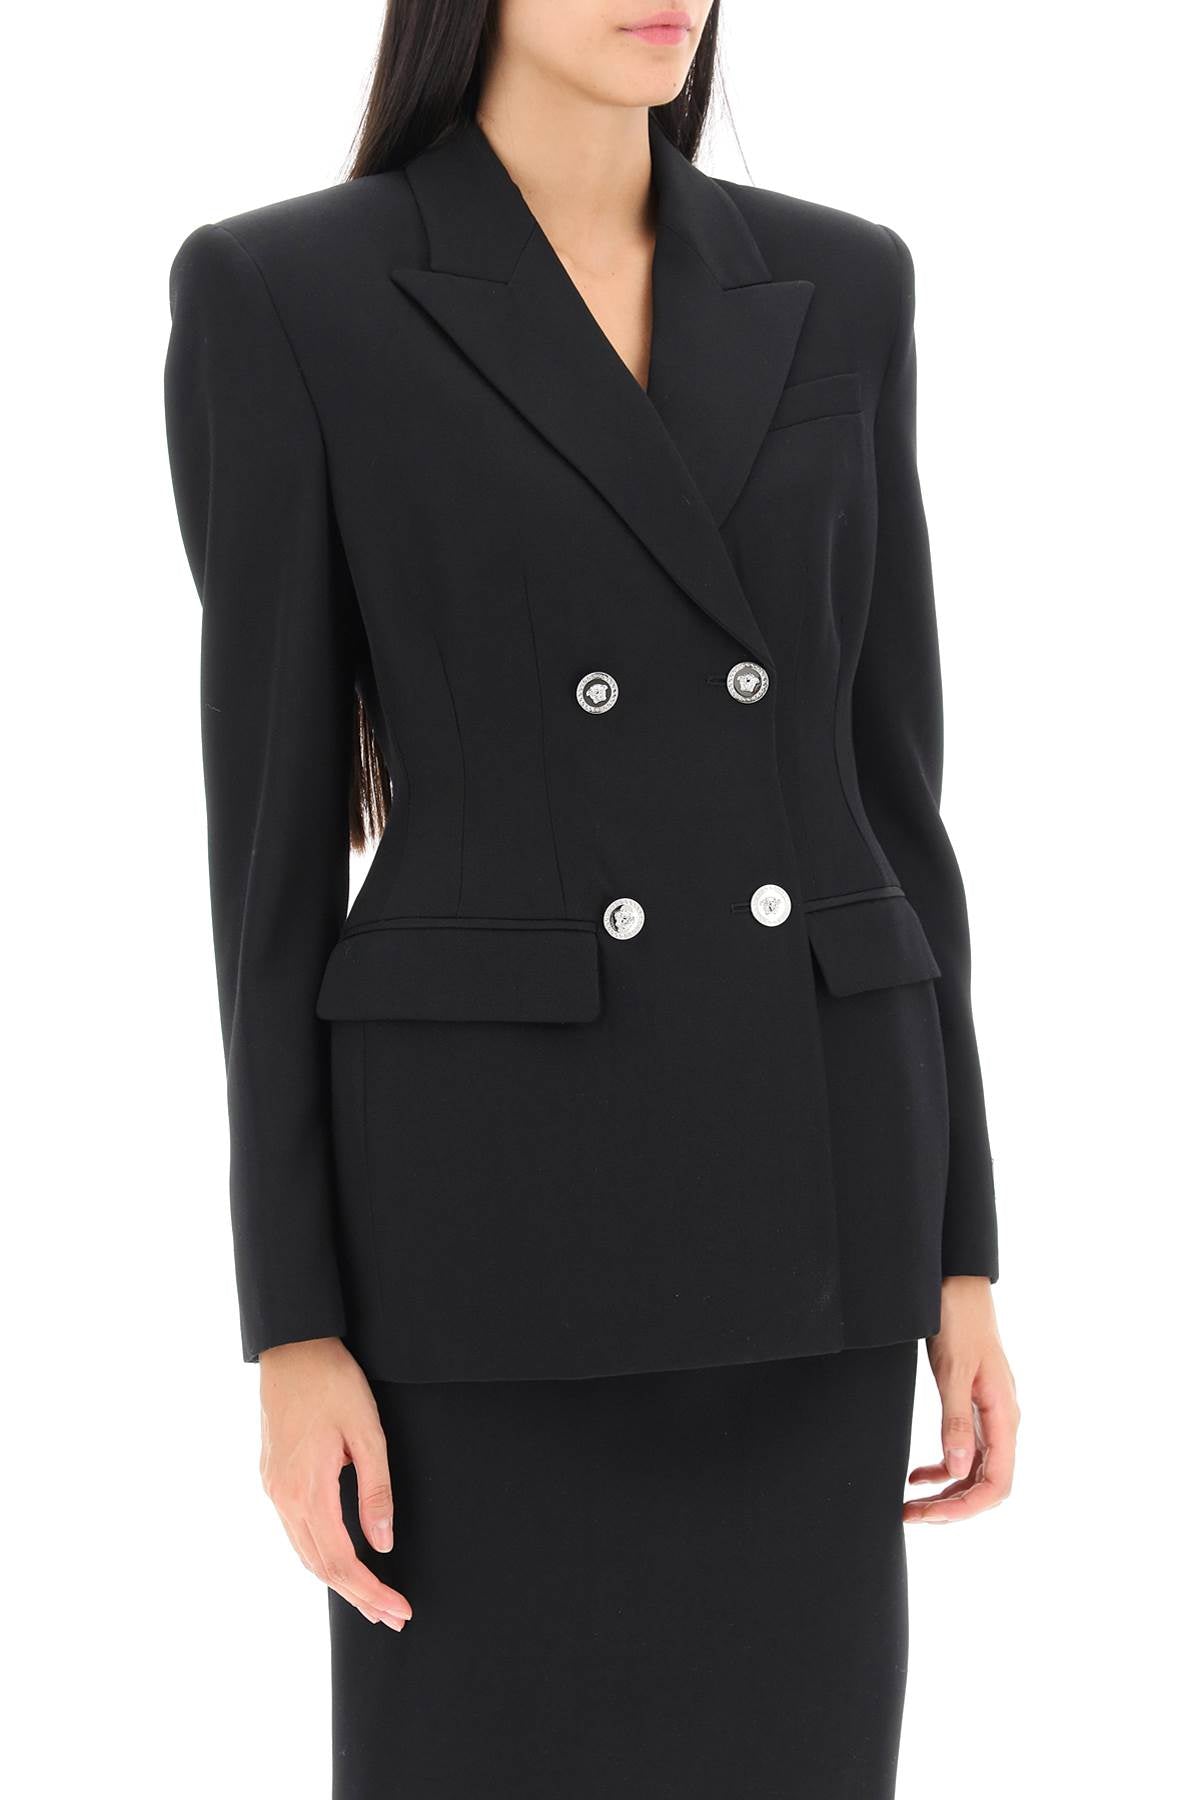 Hourglass Double-Breasted Blazer in Black for Women